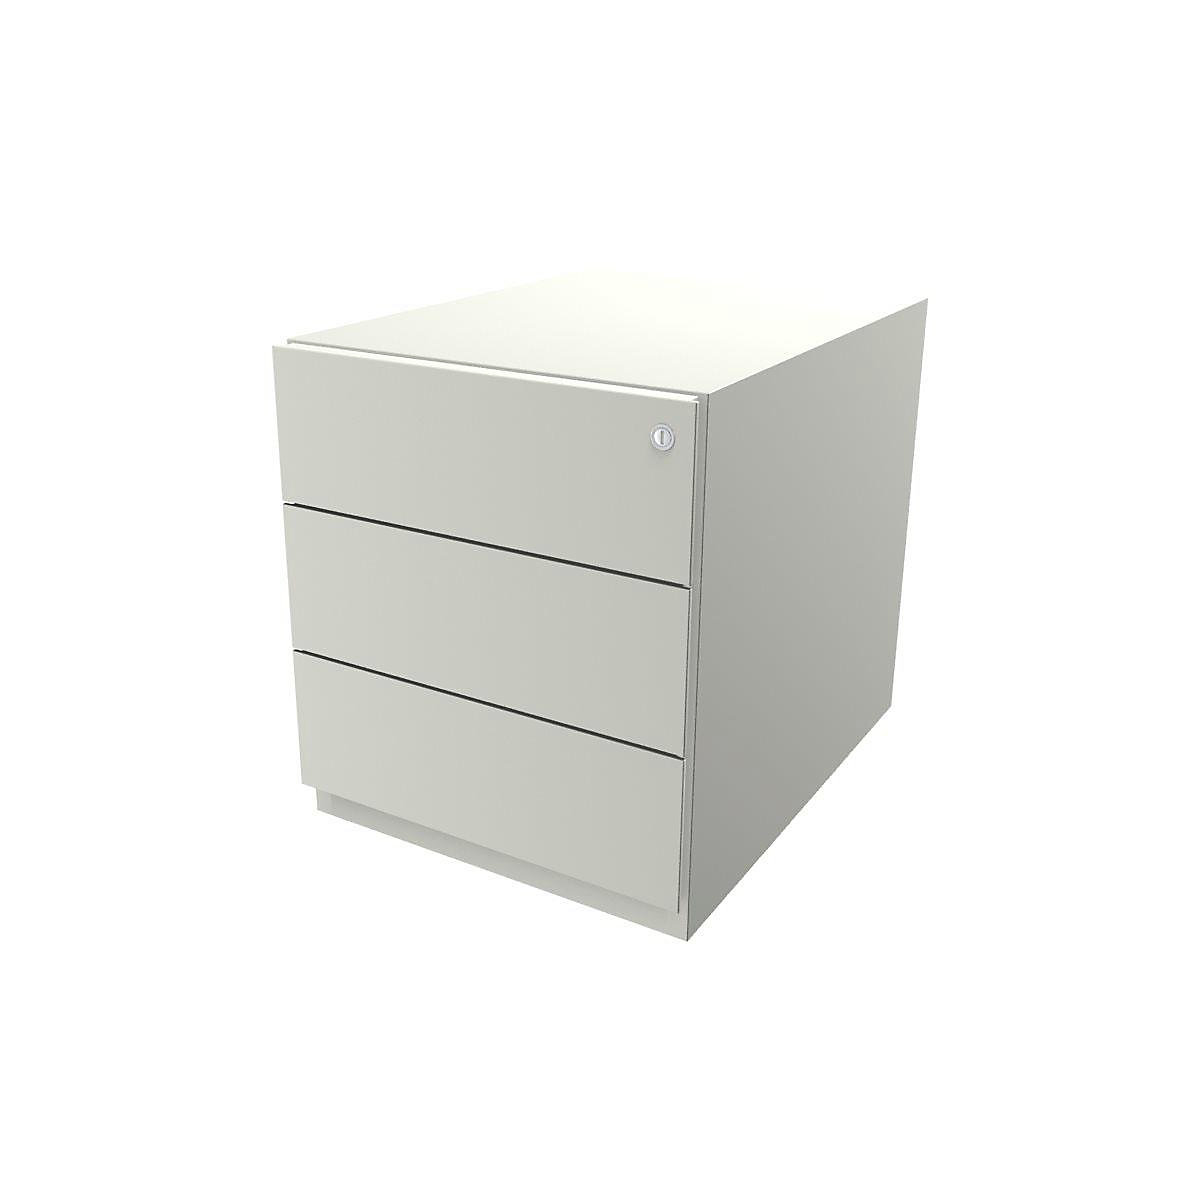 Note™ mobile drawer unit, with 3 universal drawers - BISLEY